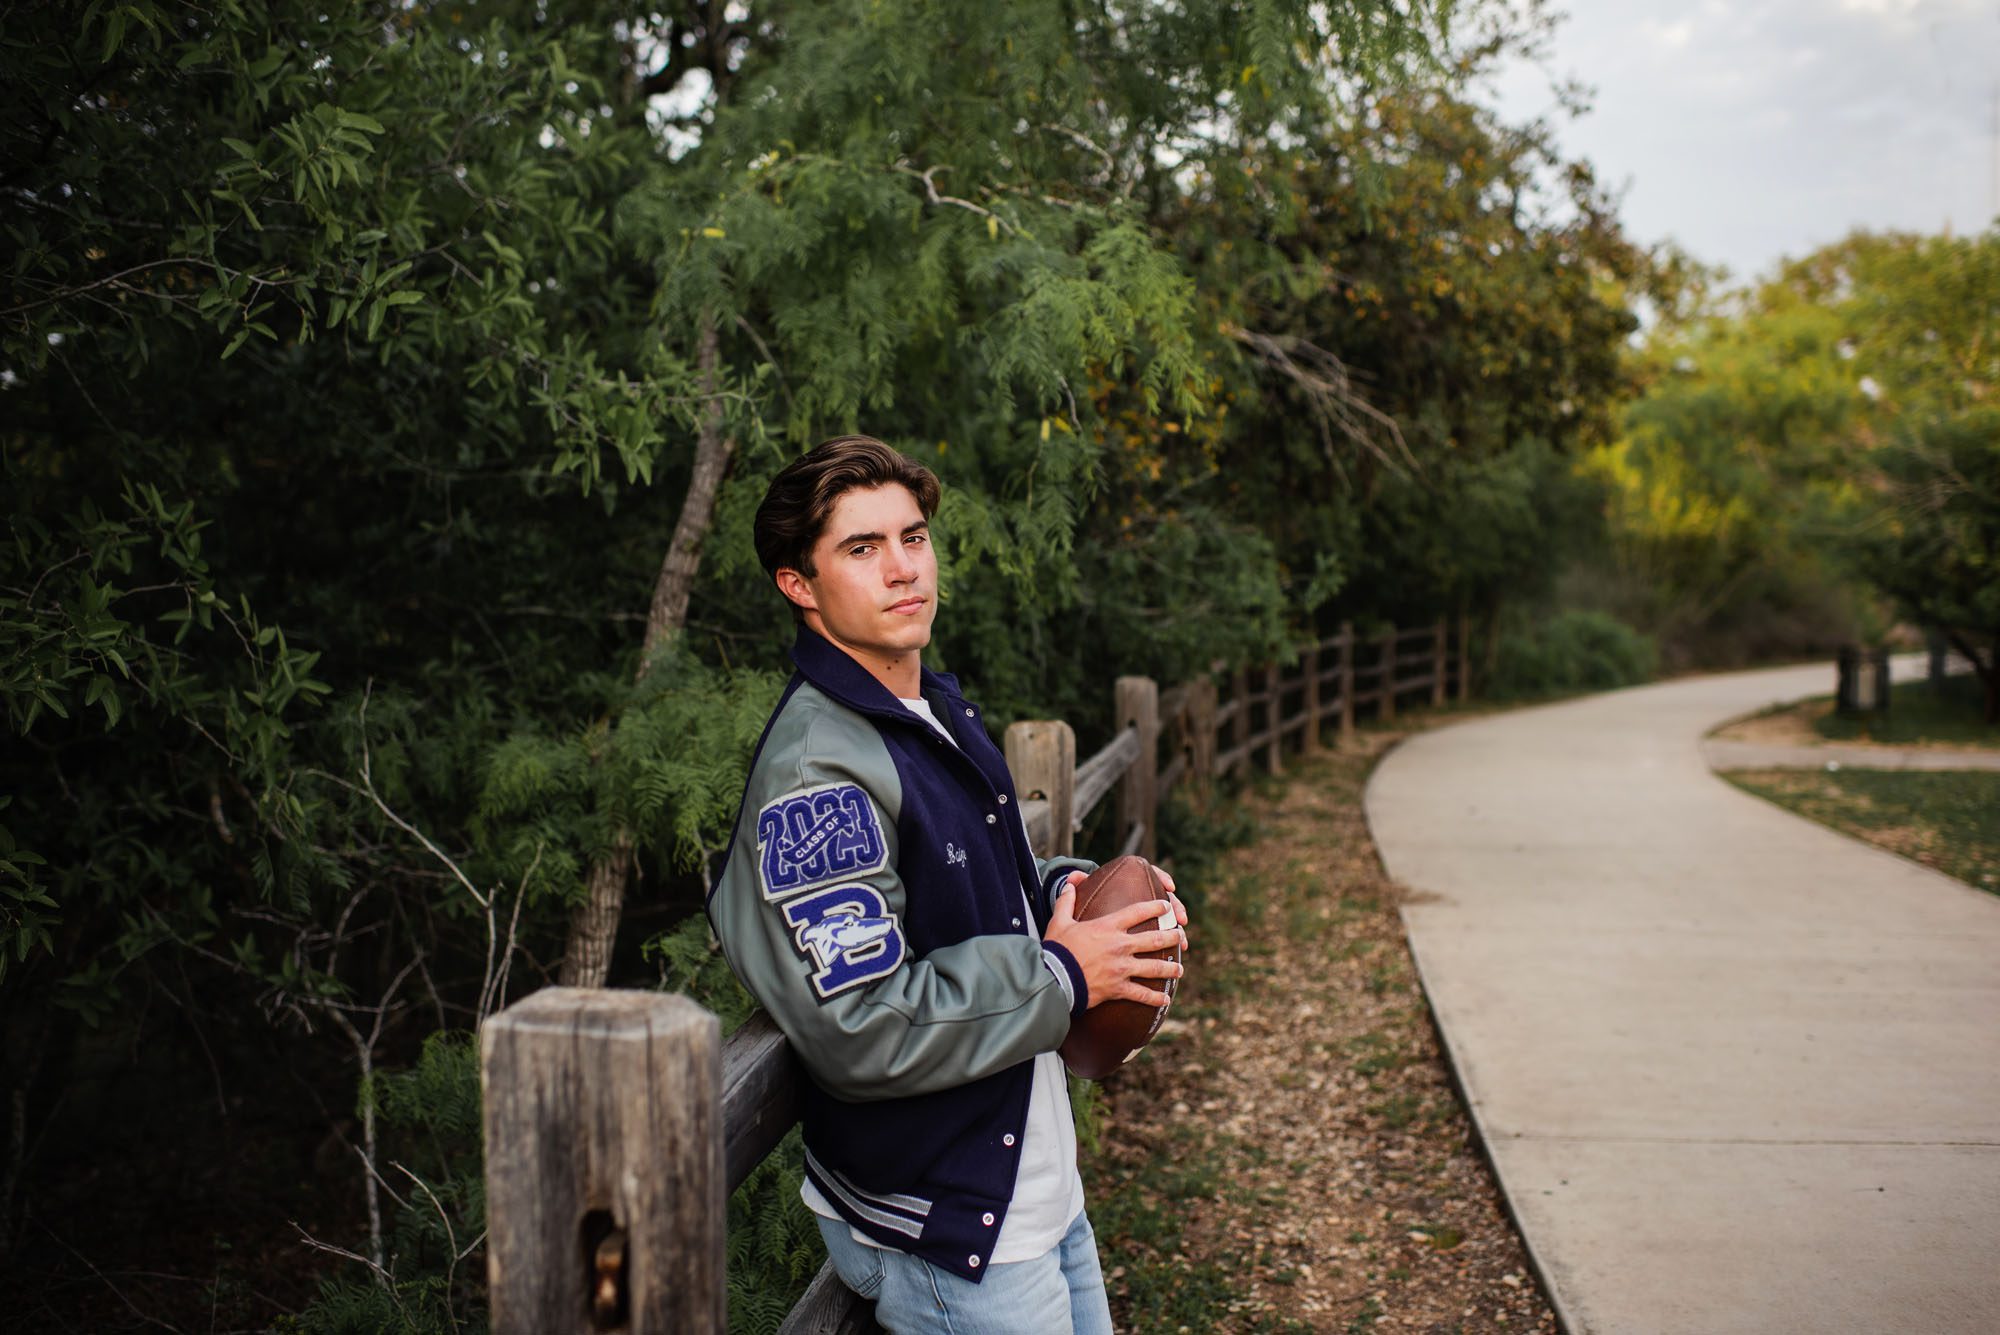 Boy holding football with letter jacket by wooden fence, San Antonio senior photographer